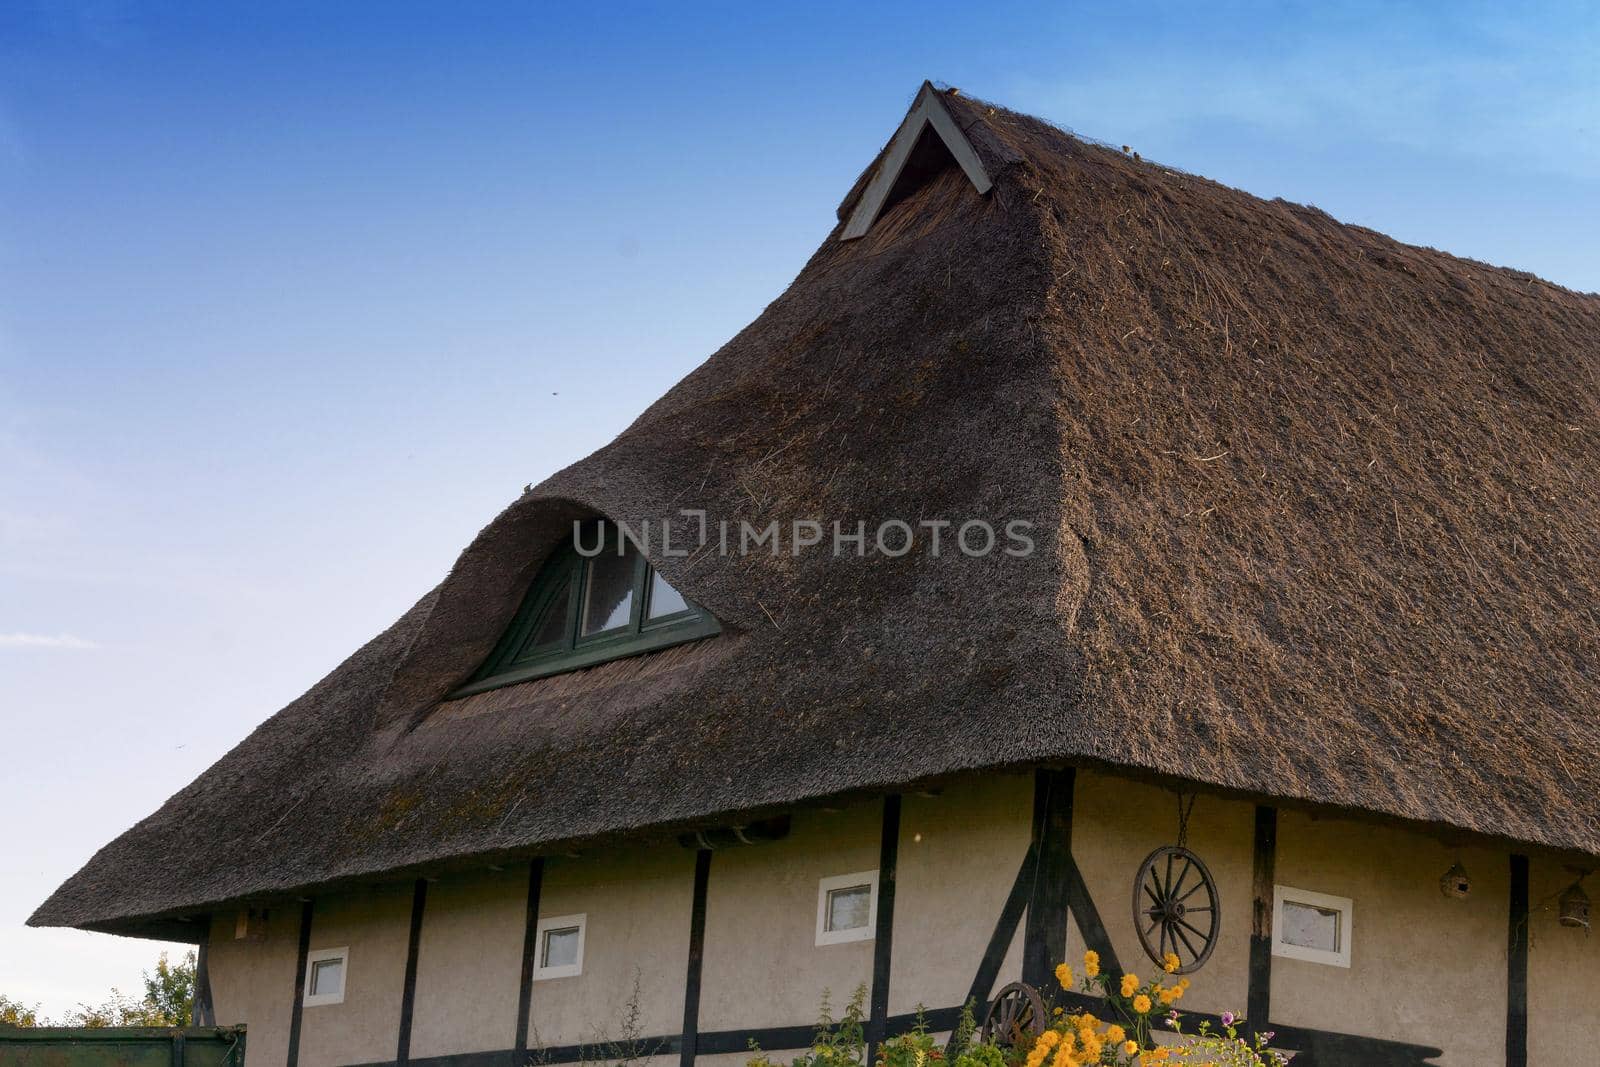 Detail of a house on the Fischland-Darß by JFsPic